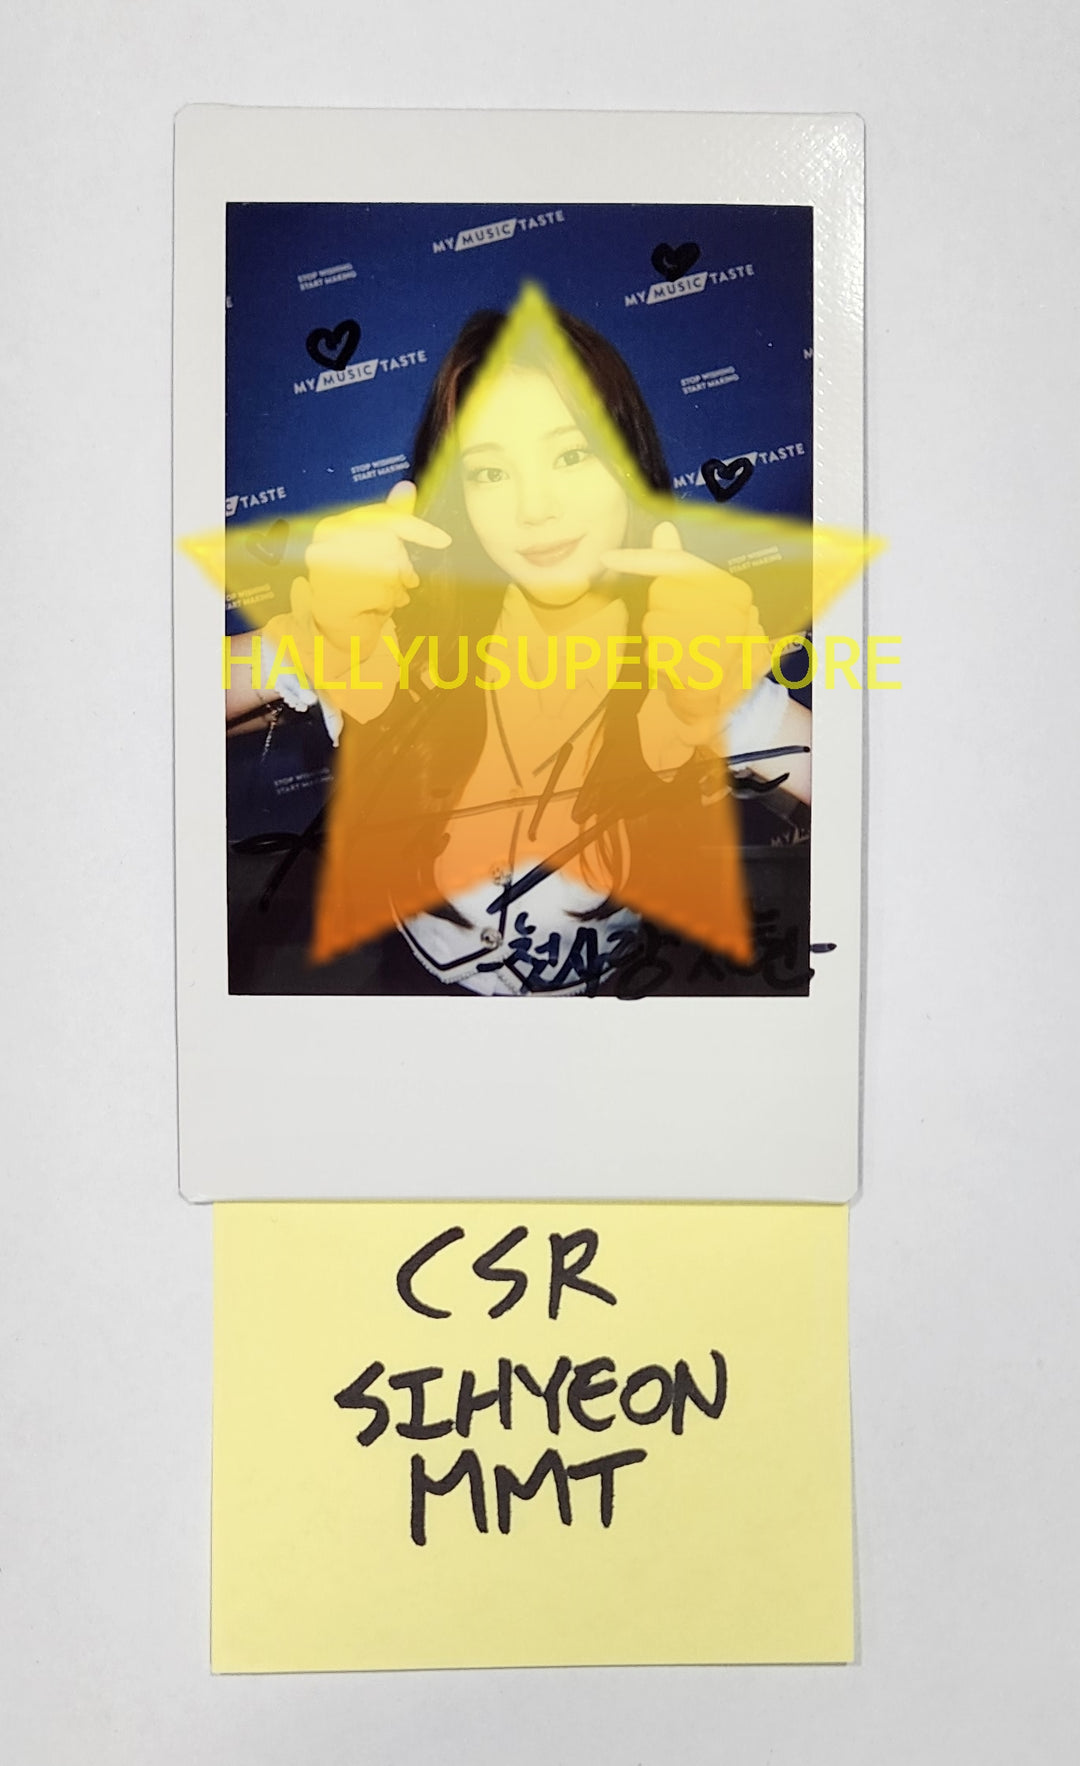 SIHYEON (of CSR) "Sequencce : 7272" - Hand Autographed(Signed) Polaroid